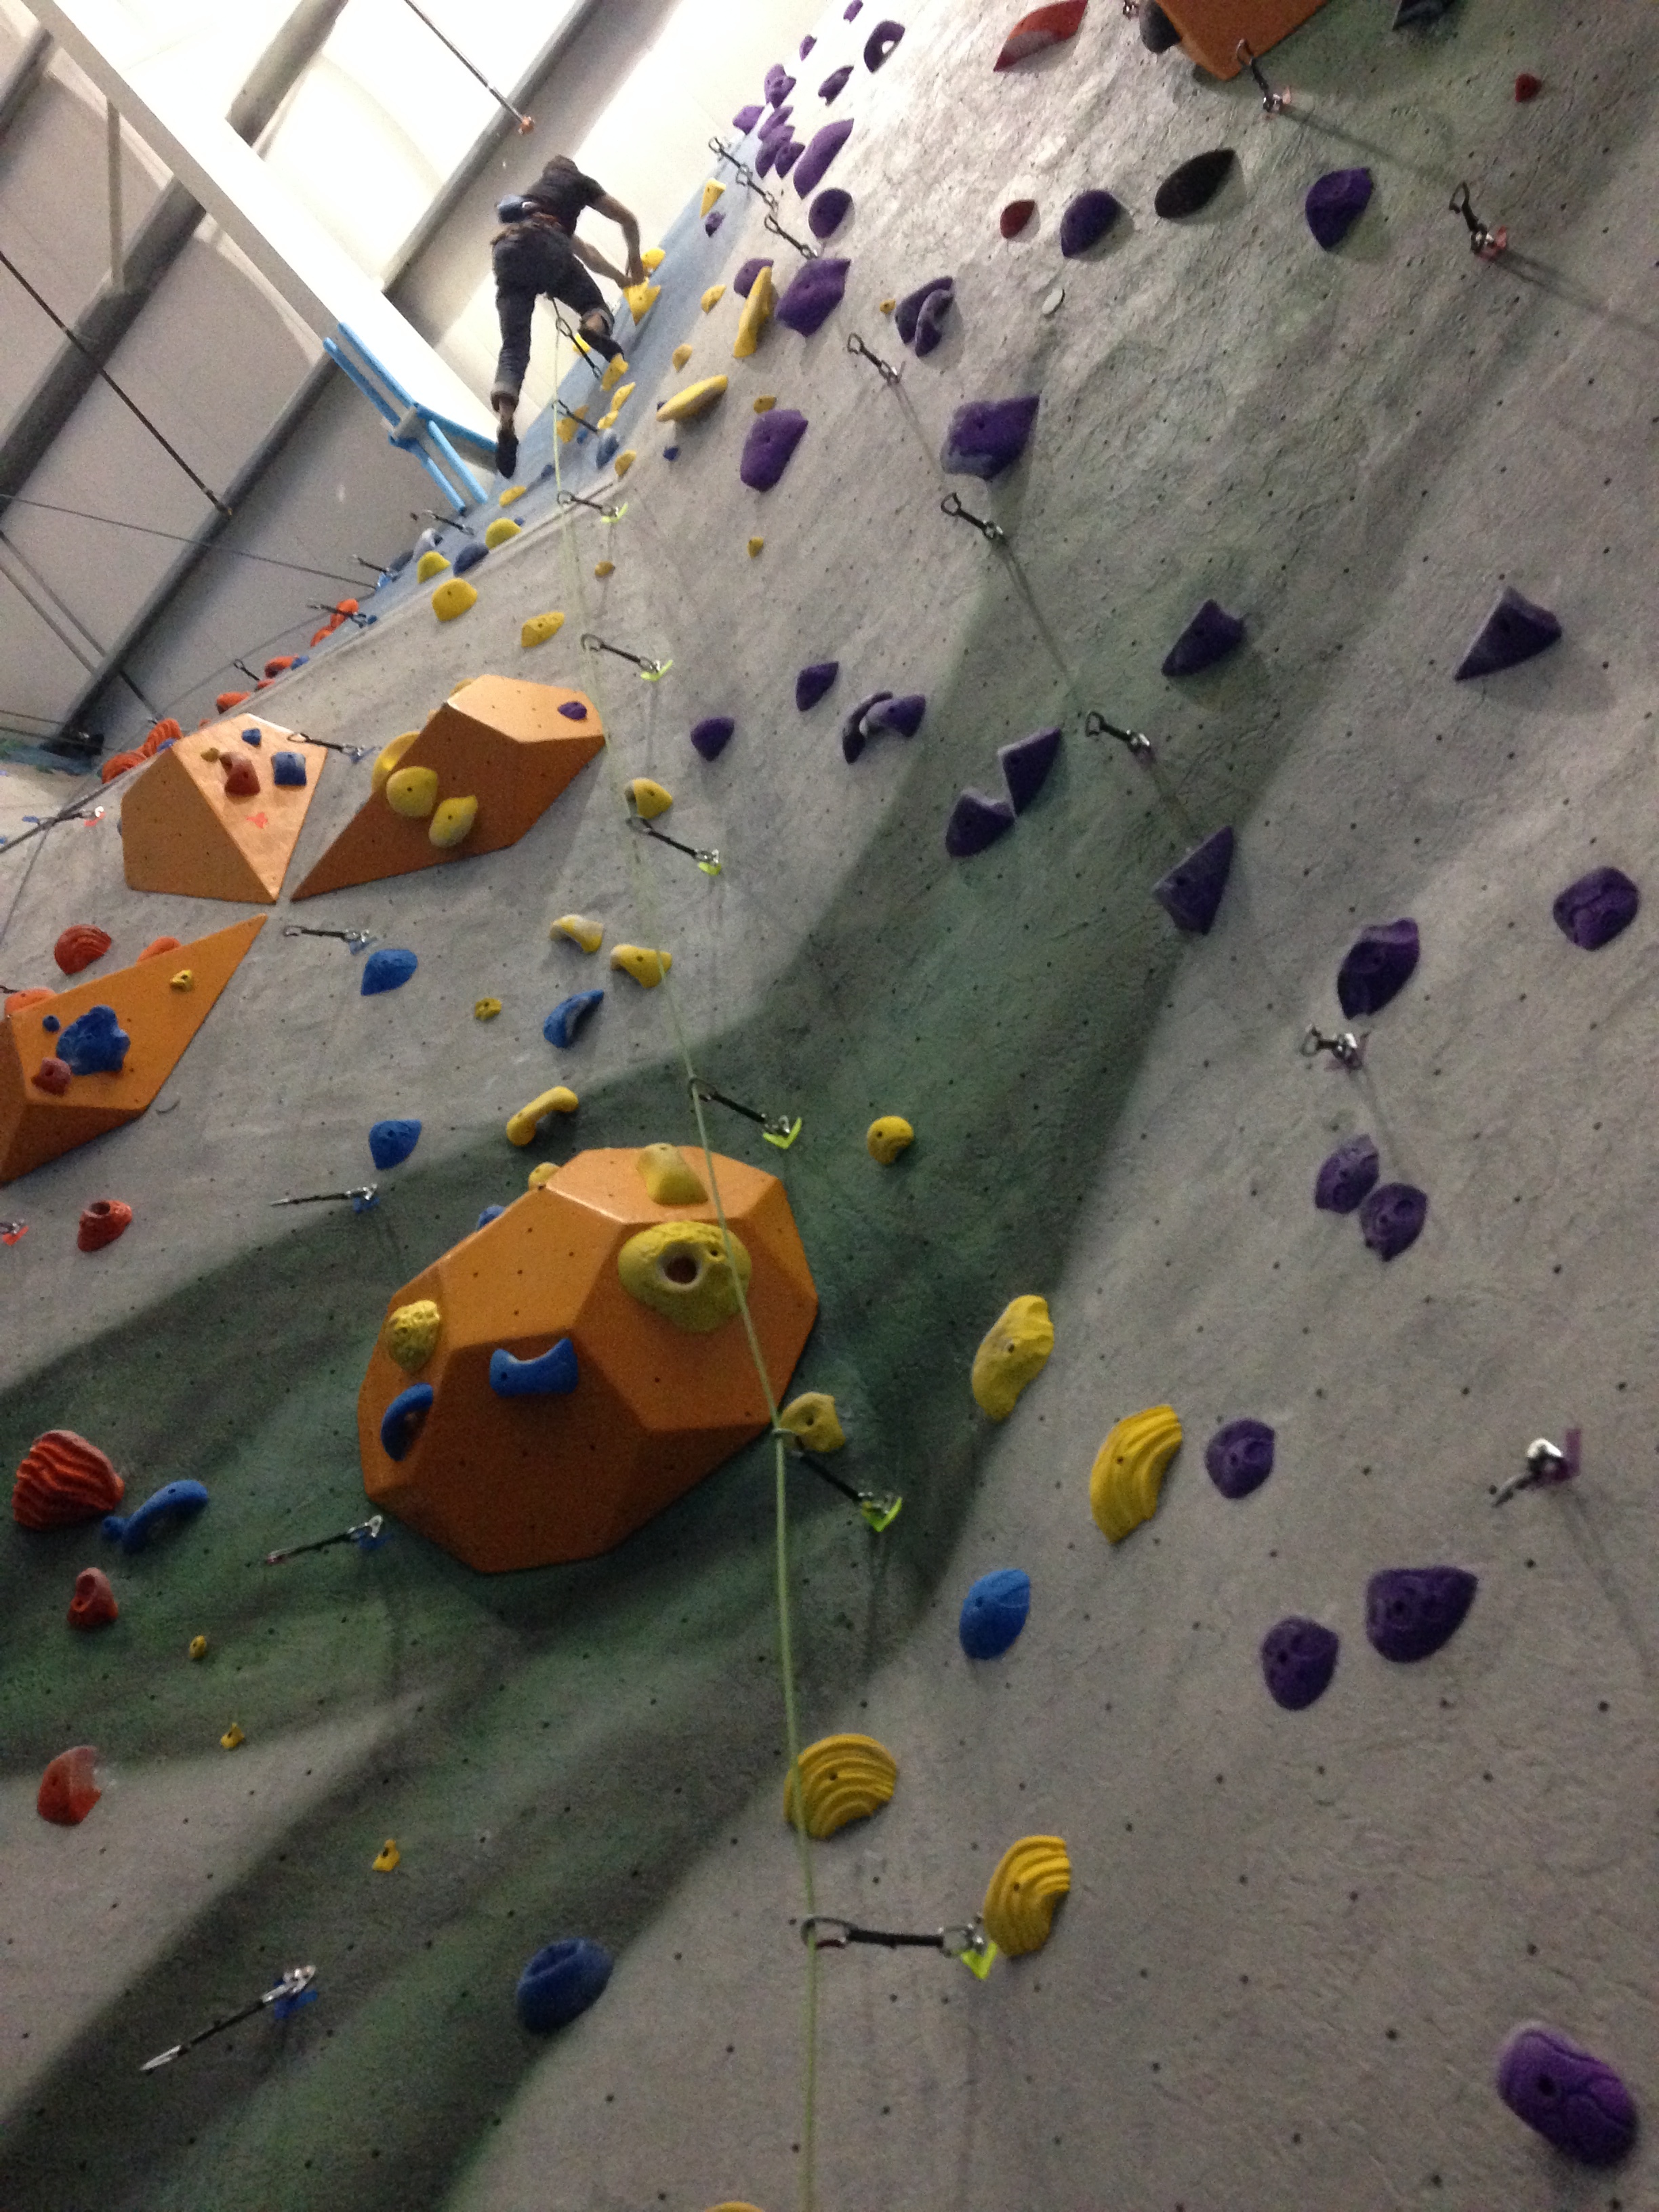 CWI + Lead Climbing Instructor